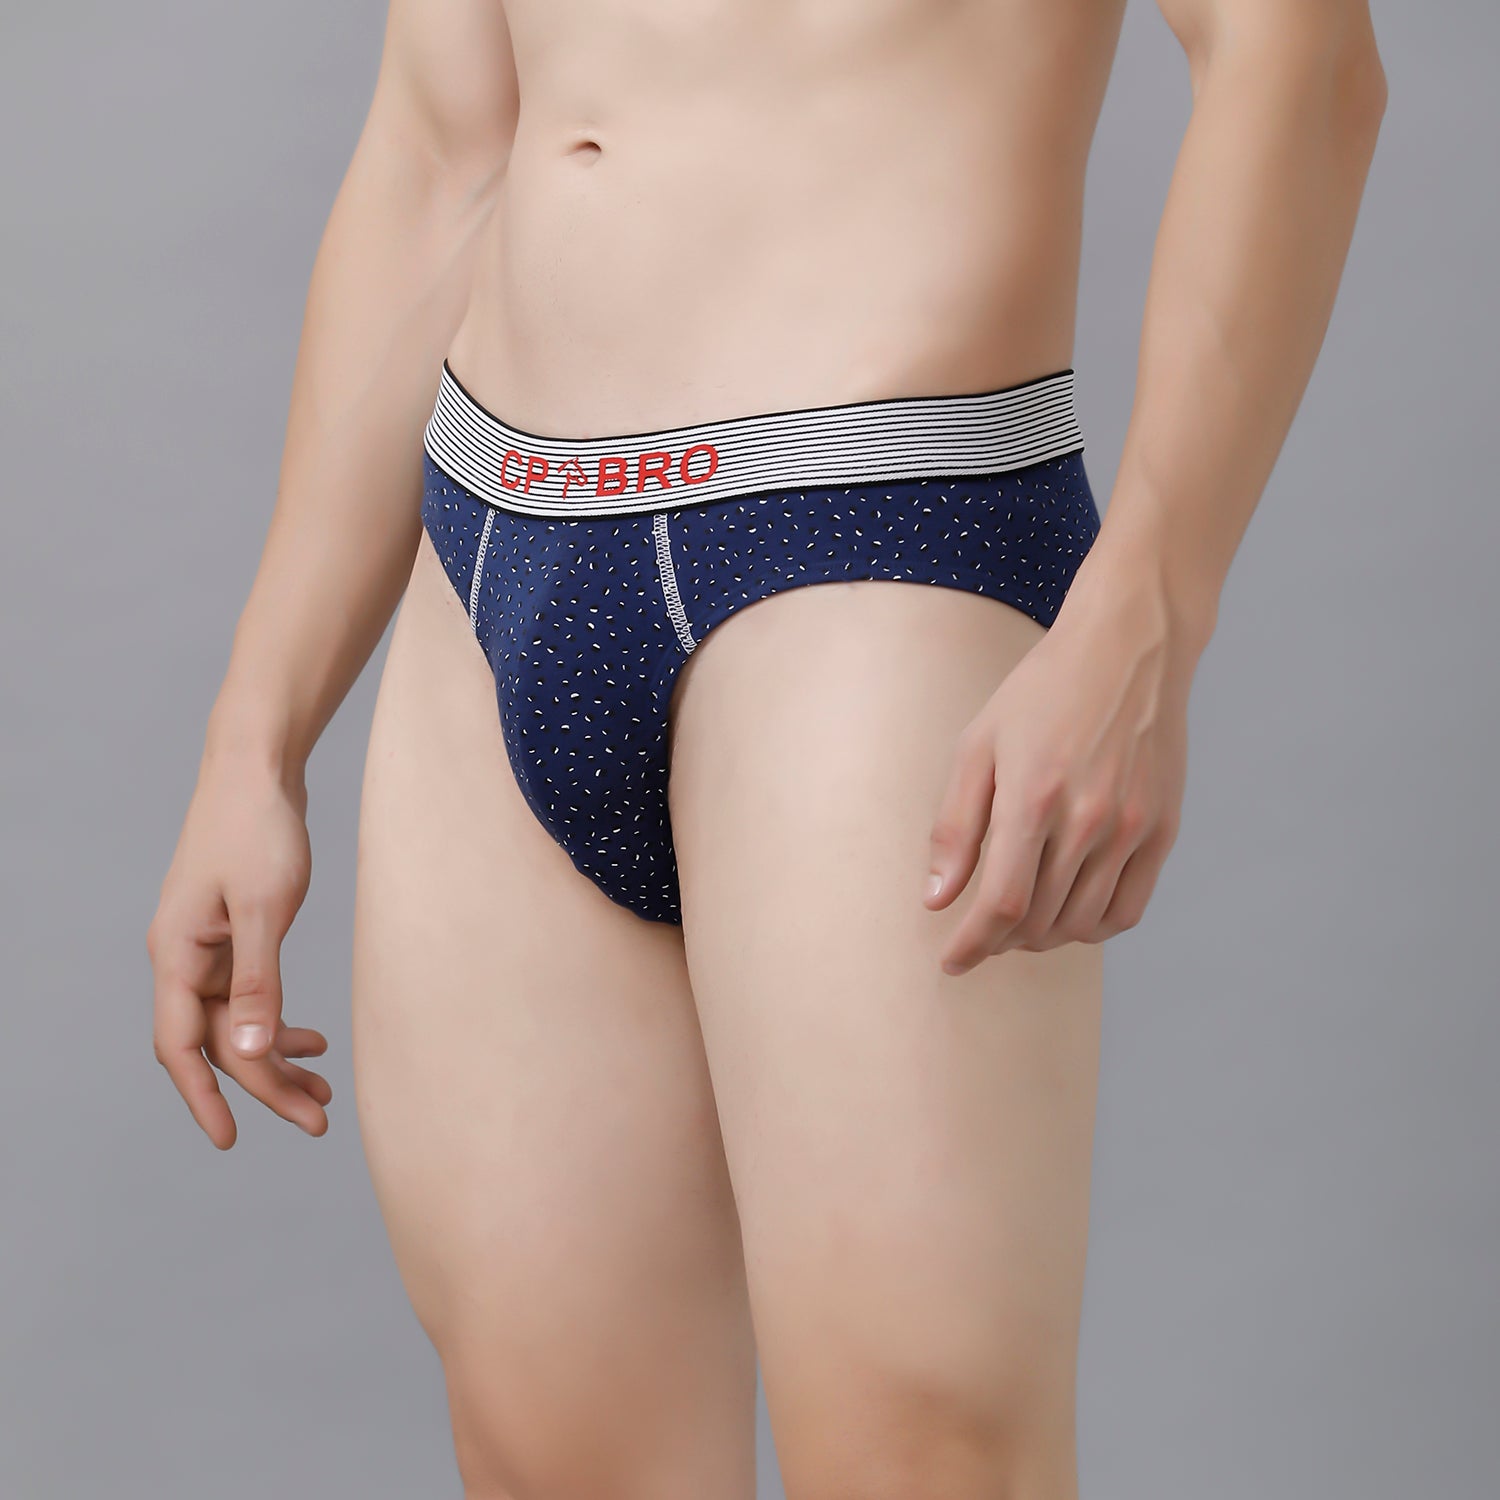 CP BRO Men's Printed Briefs with Exposed Waistband - Navy Micro Print